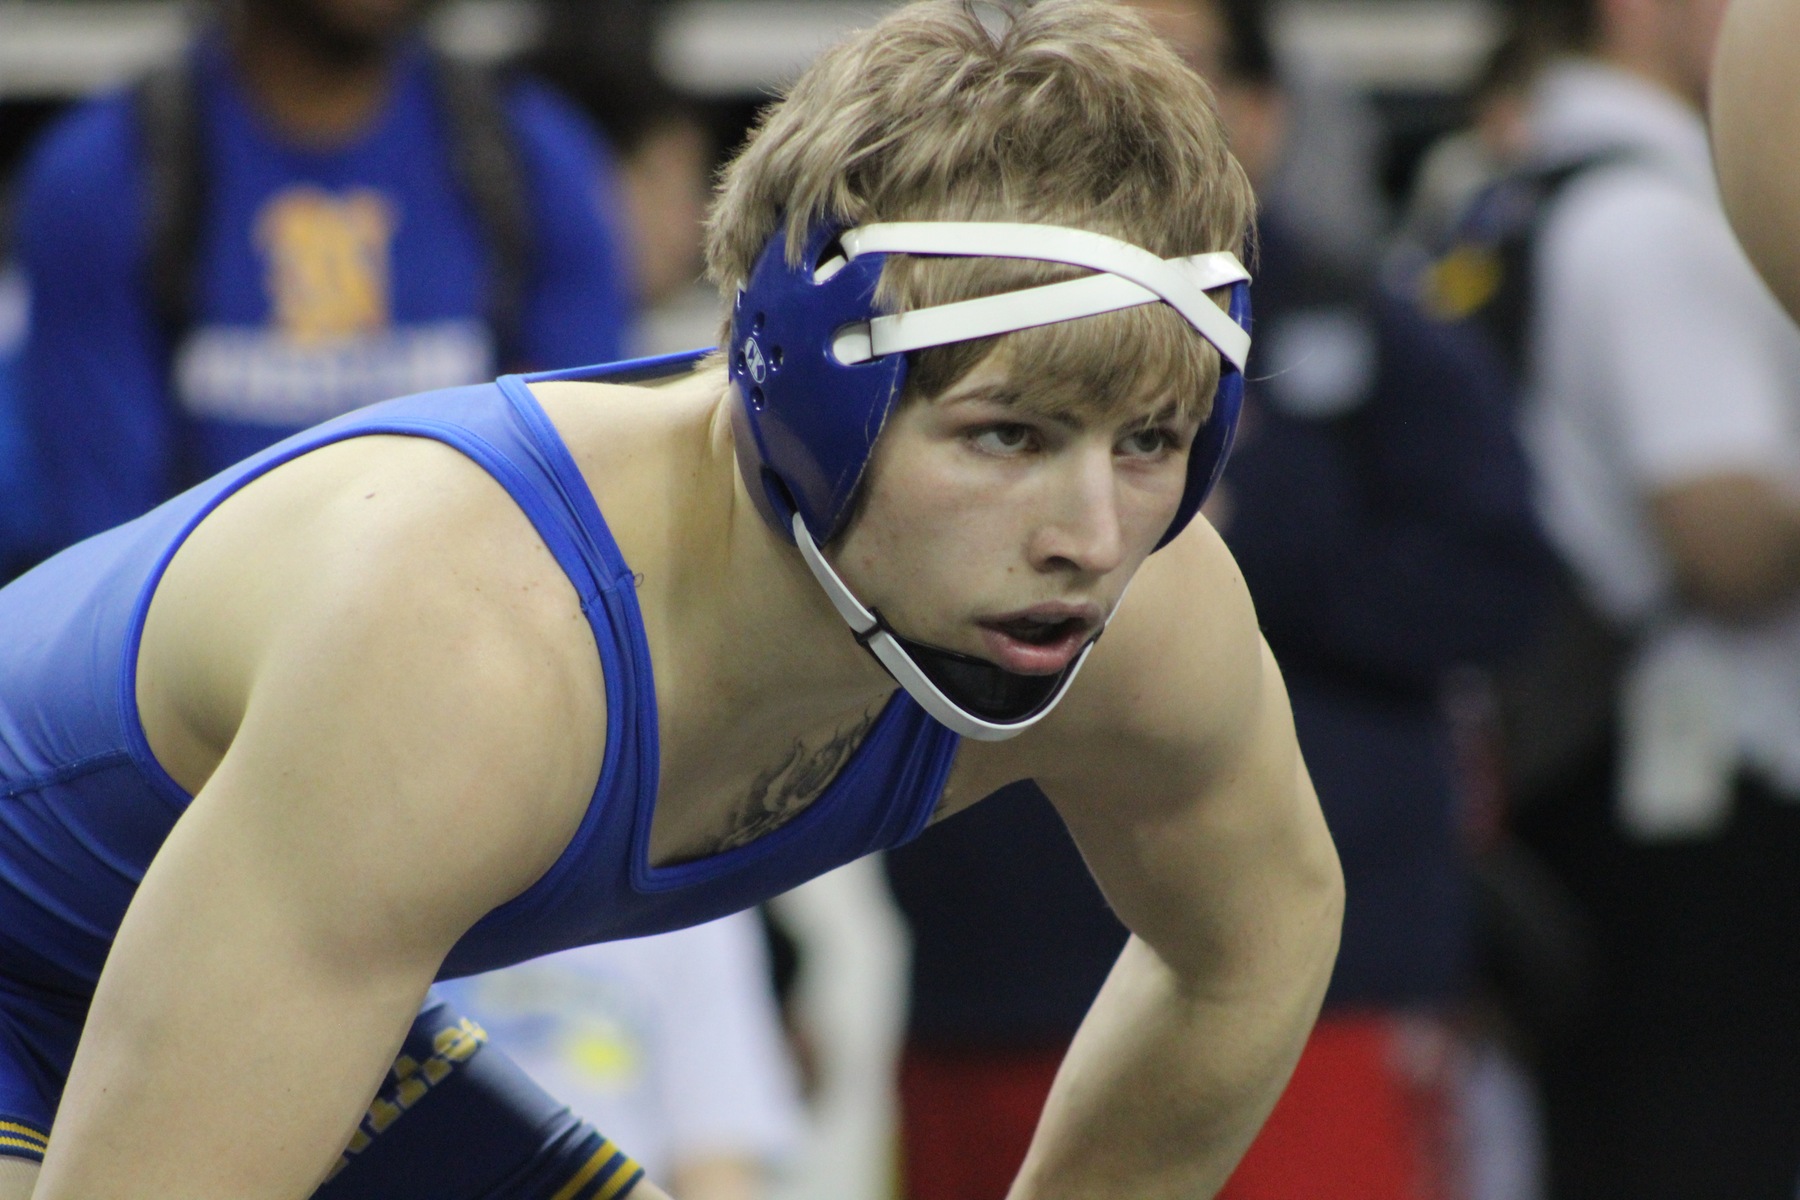 Austin Anderly faces Triton's Tyree Johnson in the semifinals Saturday morning.